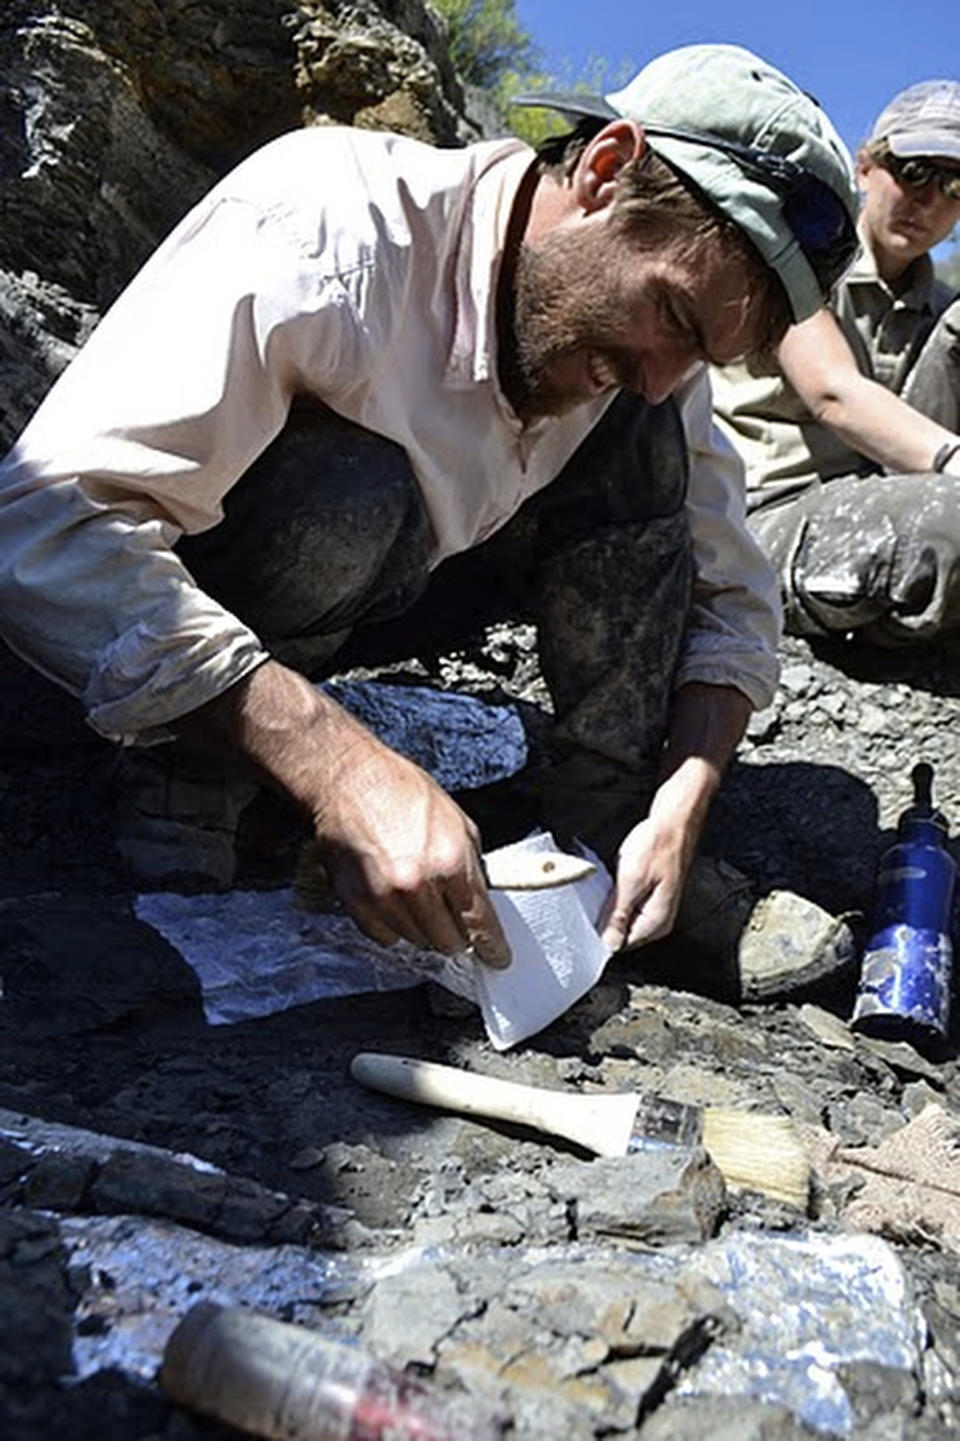 This July 14, 2011 provided by the U.S. Fish and Wildlife Services, an experts on marine reptiles, Pat Druckenmiller works carefully to prepare the plesiosaur skull for its plaster jacket at the Charles M. Russell National Wildlife Refuge, Mont. at a dig site for a fossil found in Montana nearly seven years ago that has led to the discovery this new species of prehistoric sea creature. The new species of elasmosaur is detailed in an article published Thursday, April 13, 2017, in the Journal of Vertebrate Paleontology. The creature lived about 70 million years ago in the inland sea that flowed east of the Rocky Mountains from Canada to the Gulf of Mexico. (Marcus Hockett /U.S. Fish and Wildlife Services via AP)